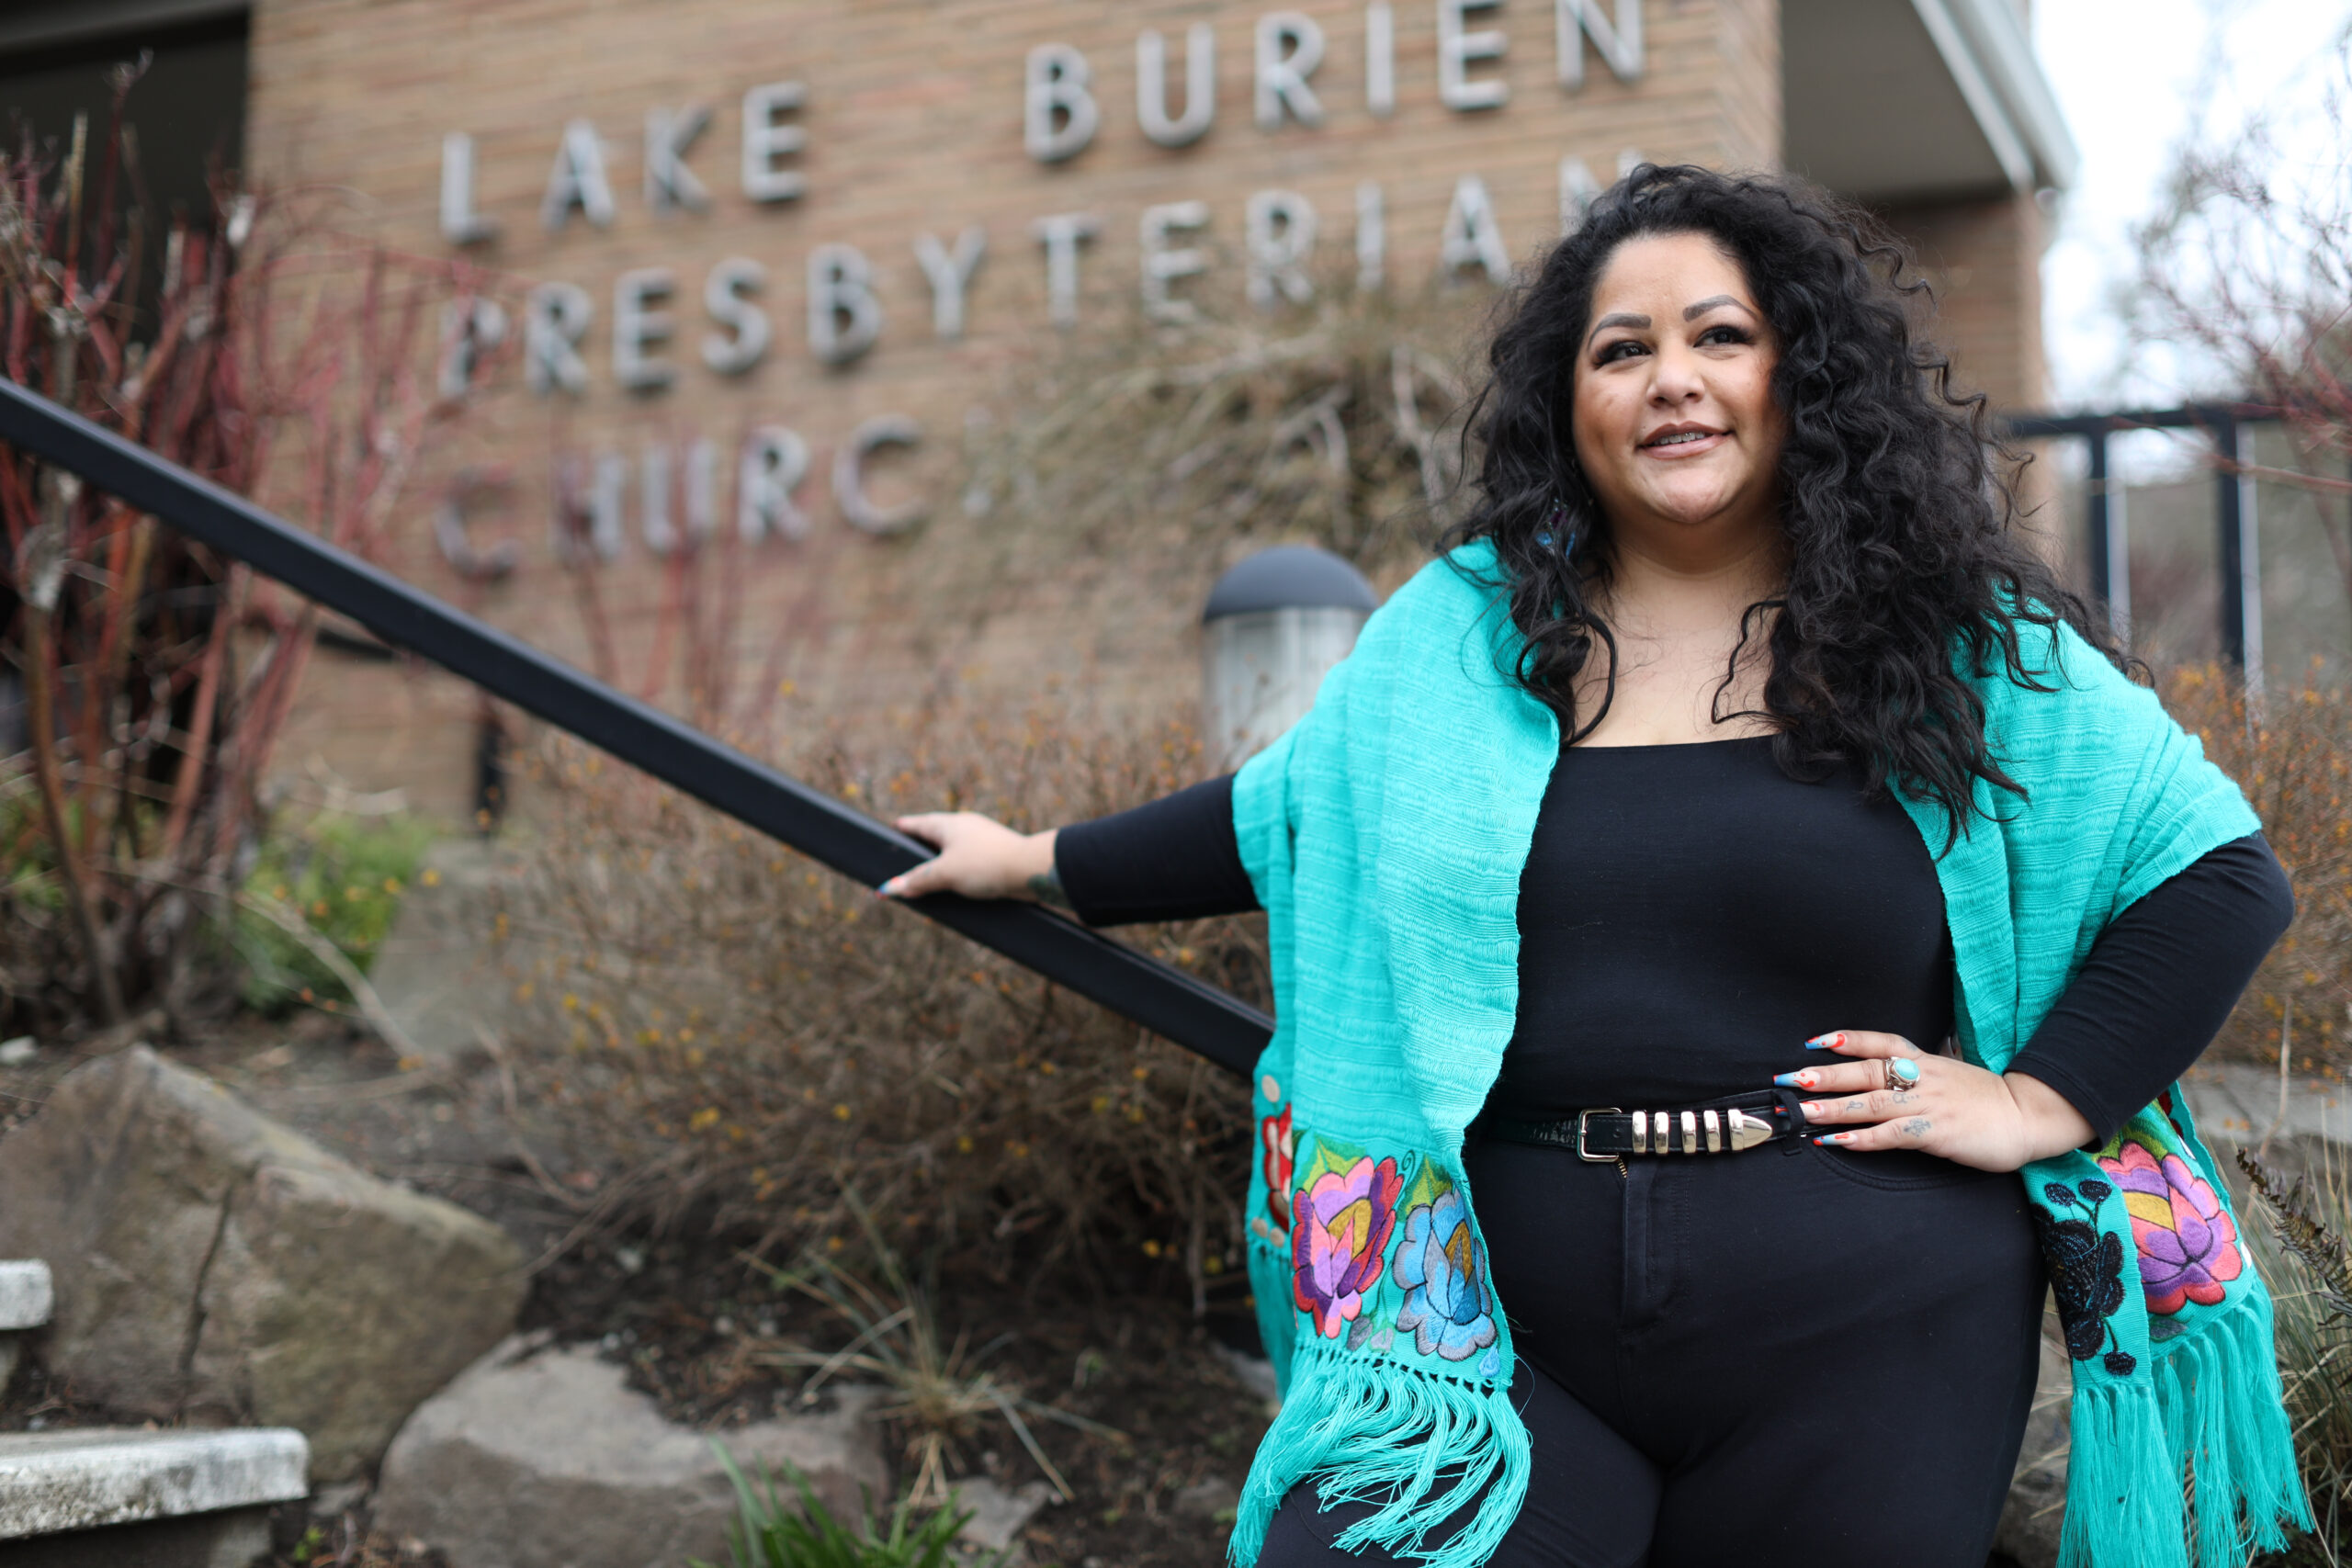 http://Roxana%20wearing%20a%20turquoise%20shawl,%20black%20pants%20and%20top%20standing%20on%20the%20steps%20of%20the%20Lake%20Burien%20Presbyterian%20Church